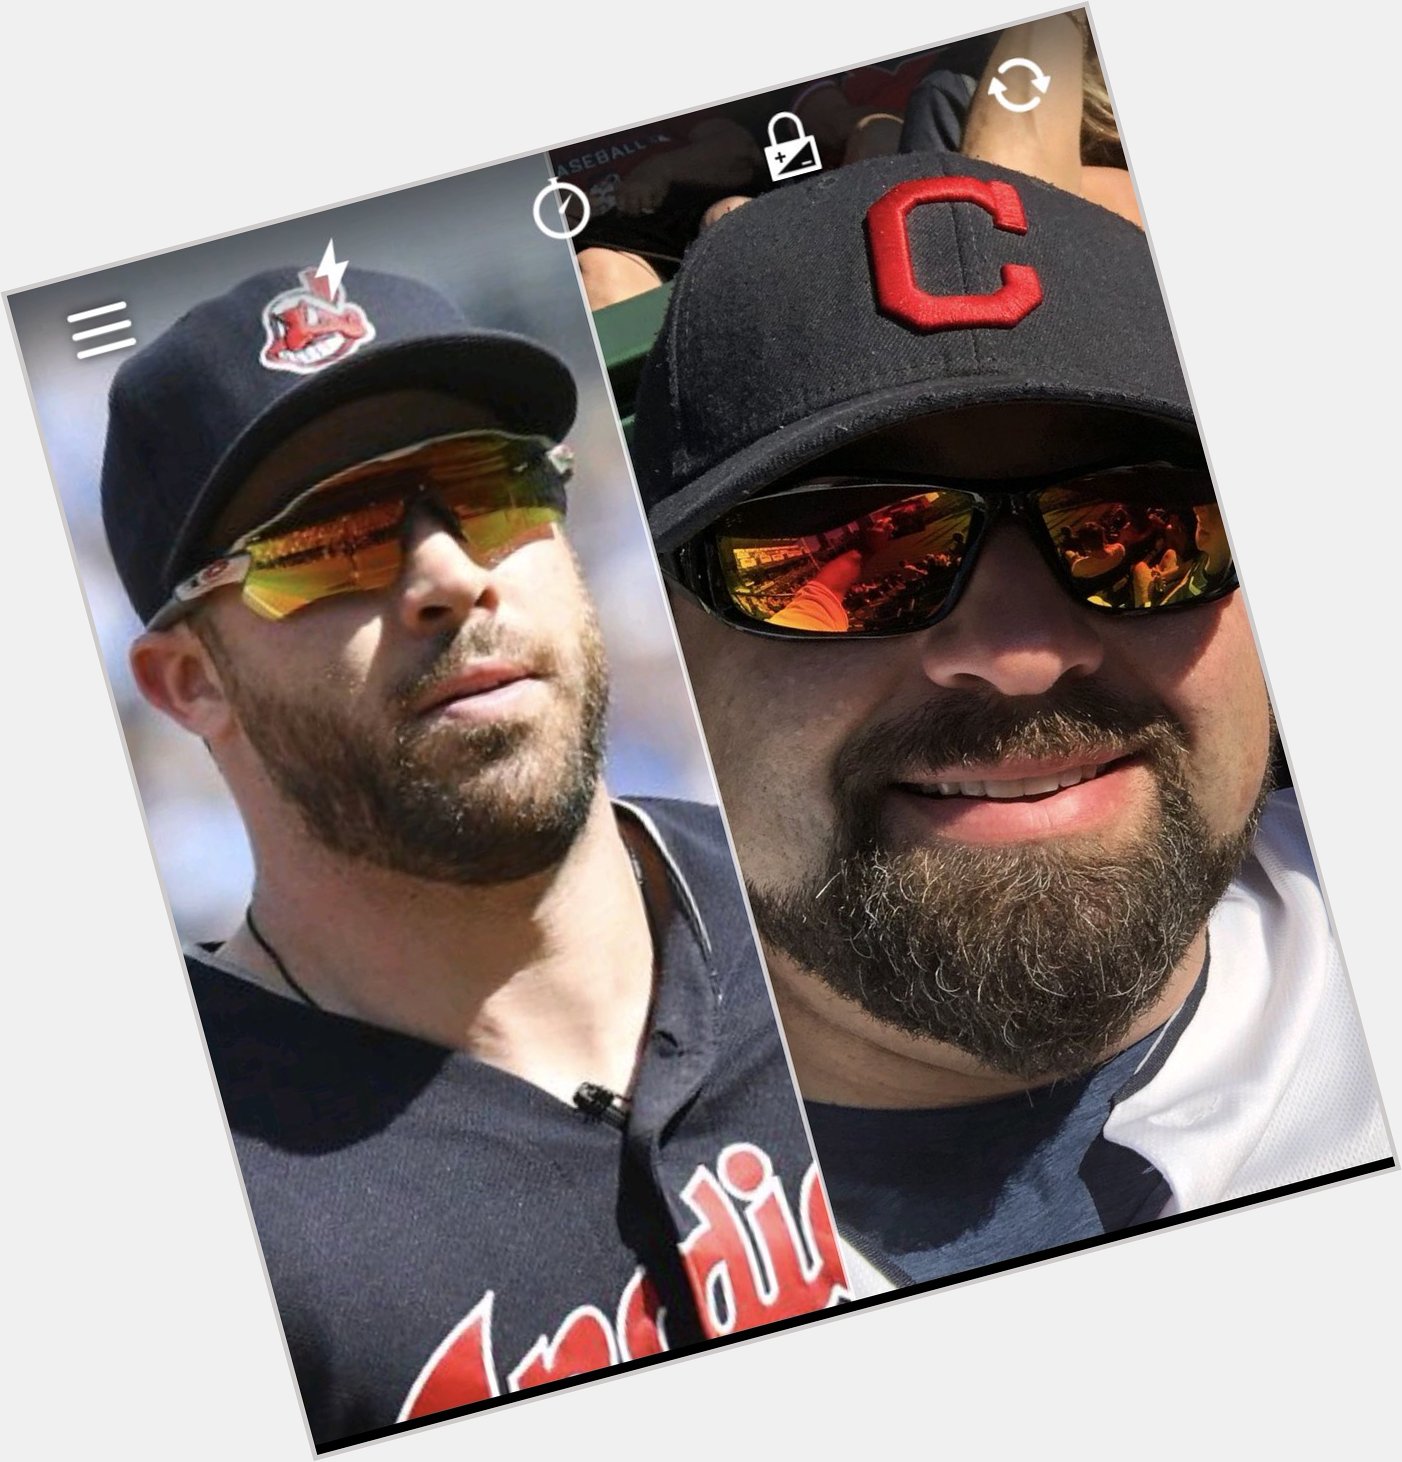 Happy Bday shout out to my little brother Jason Kipnis of the Indians....hoping for a quick return to the lineup  